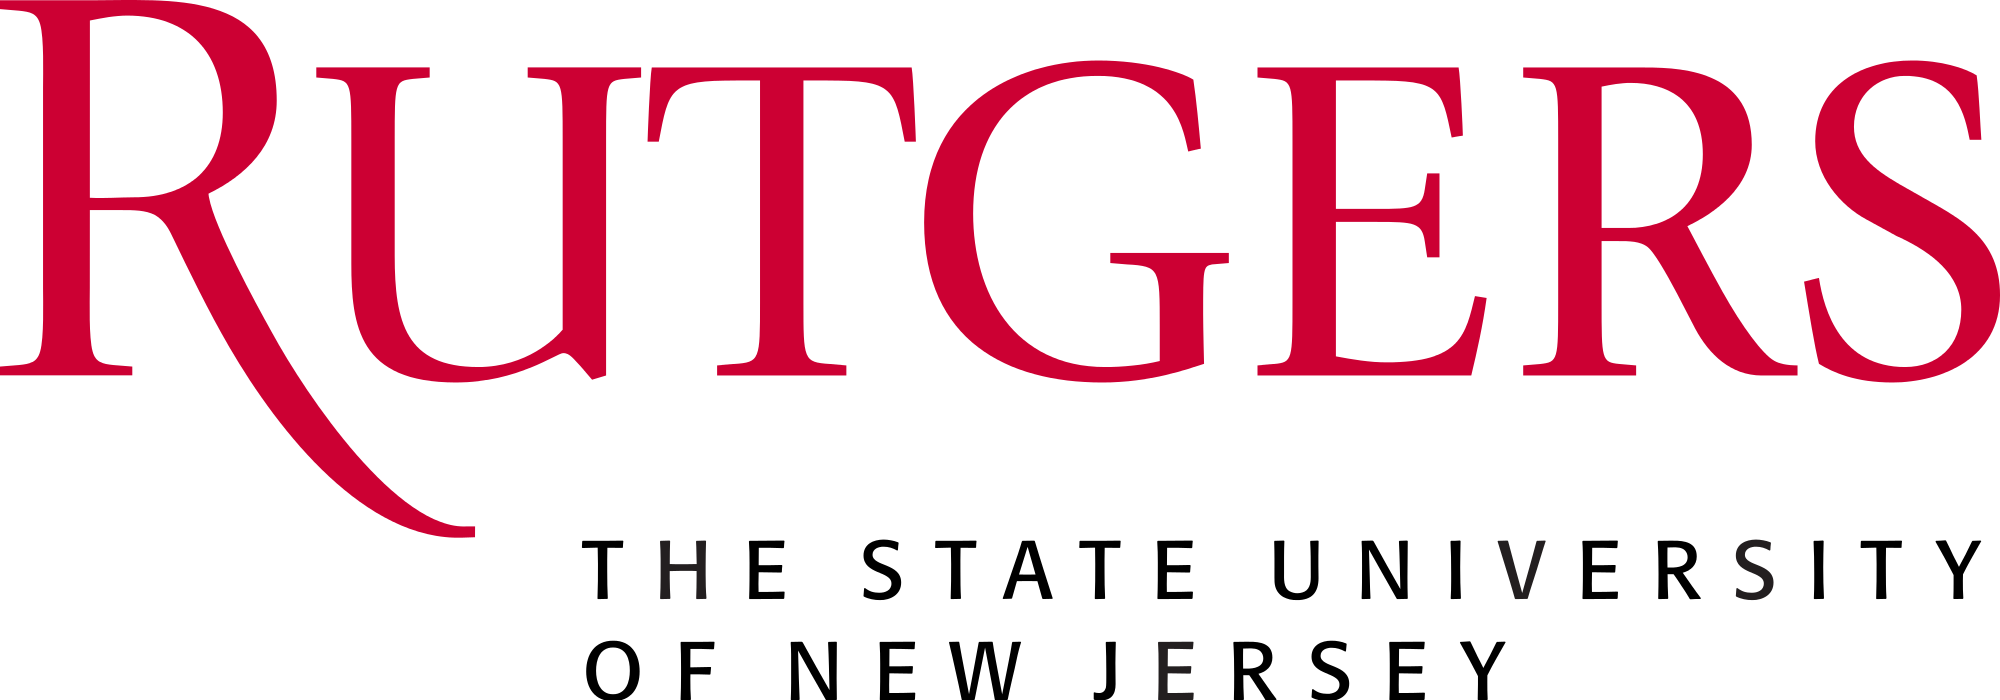 Rutgers_University_with_the_state_university_logo.svg